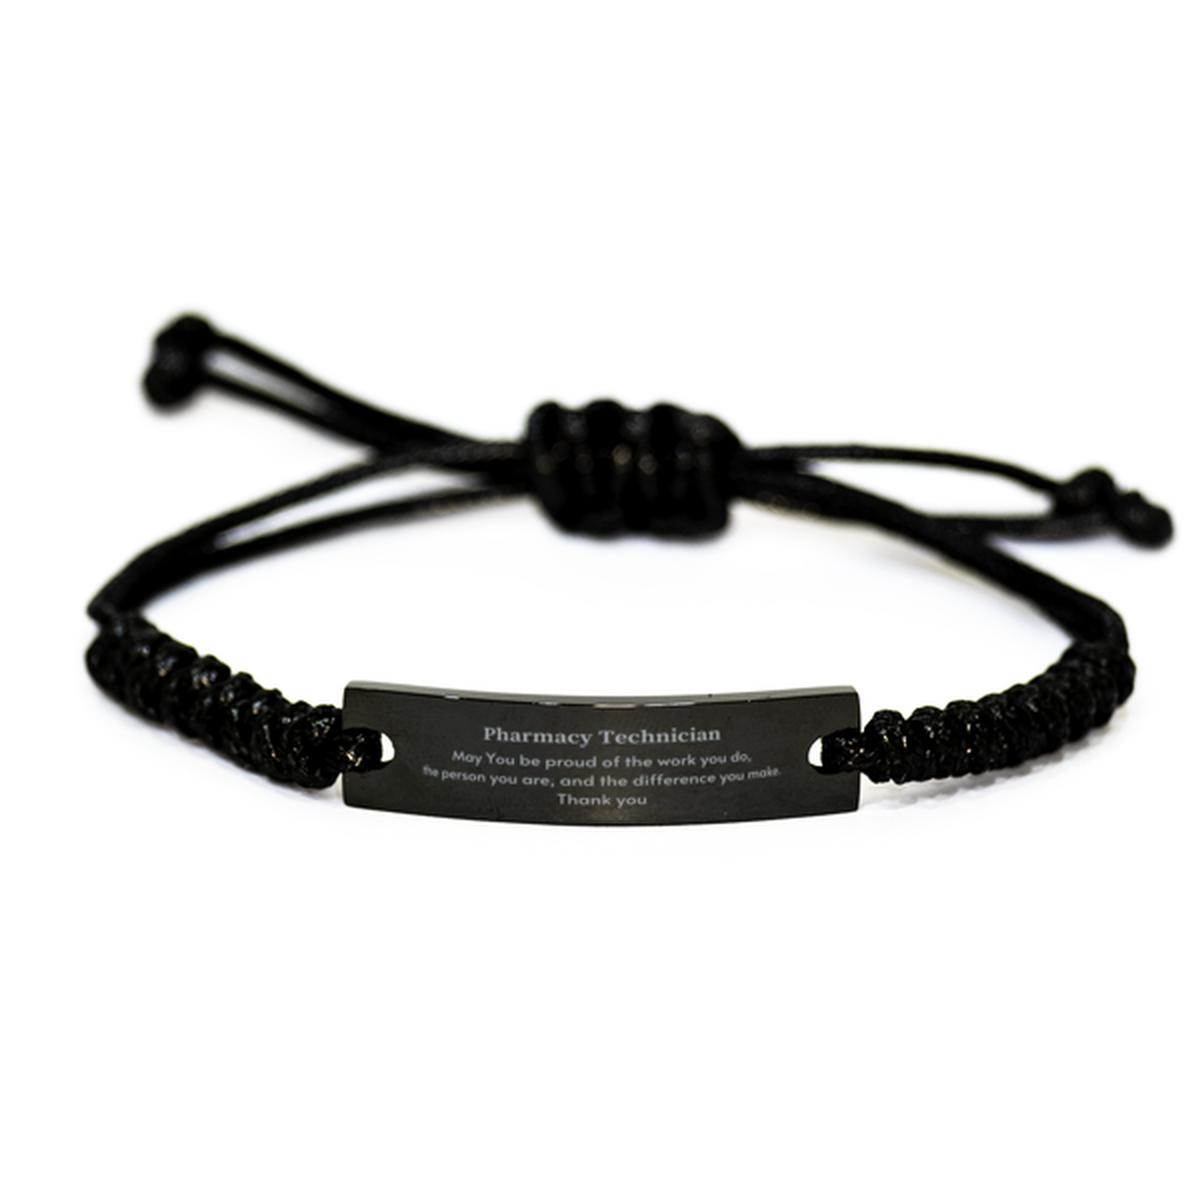 Heartwarming Black Rope Bracelet Retirement Coworkers Gifts for Pharmacy Technician, Pharmacy Technician May You be proud of the work you do, the person you are Gifts for Boss Men Women Friends